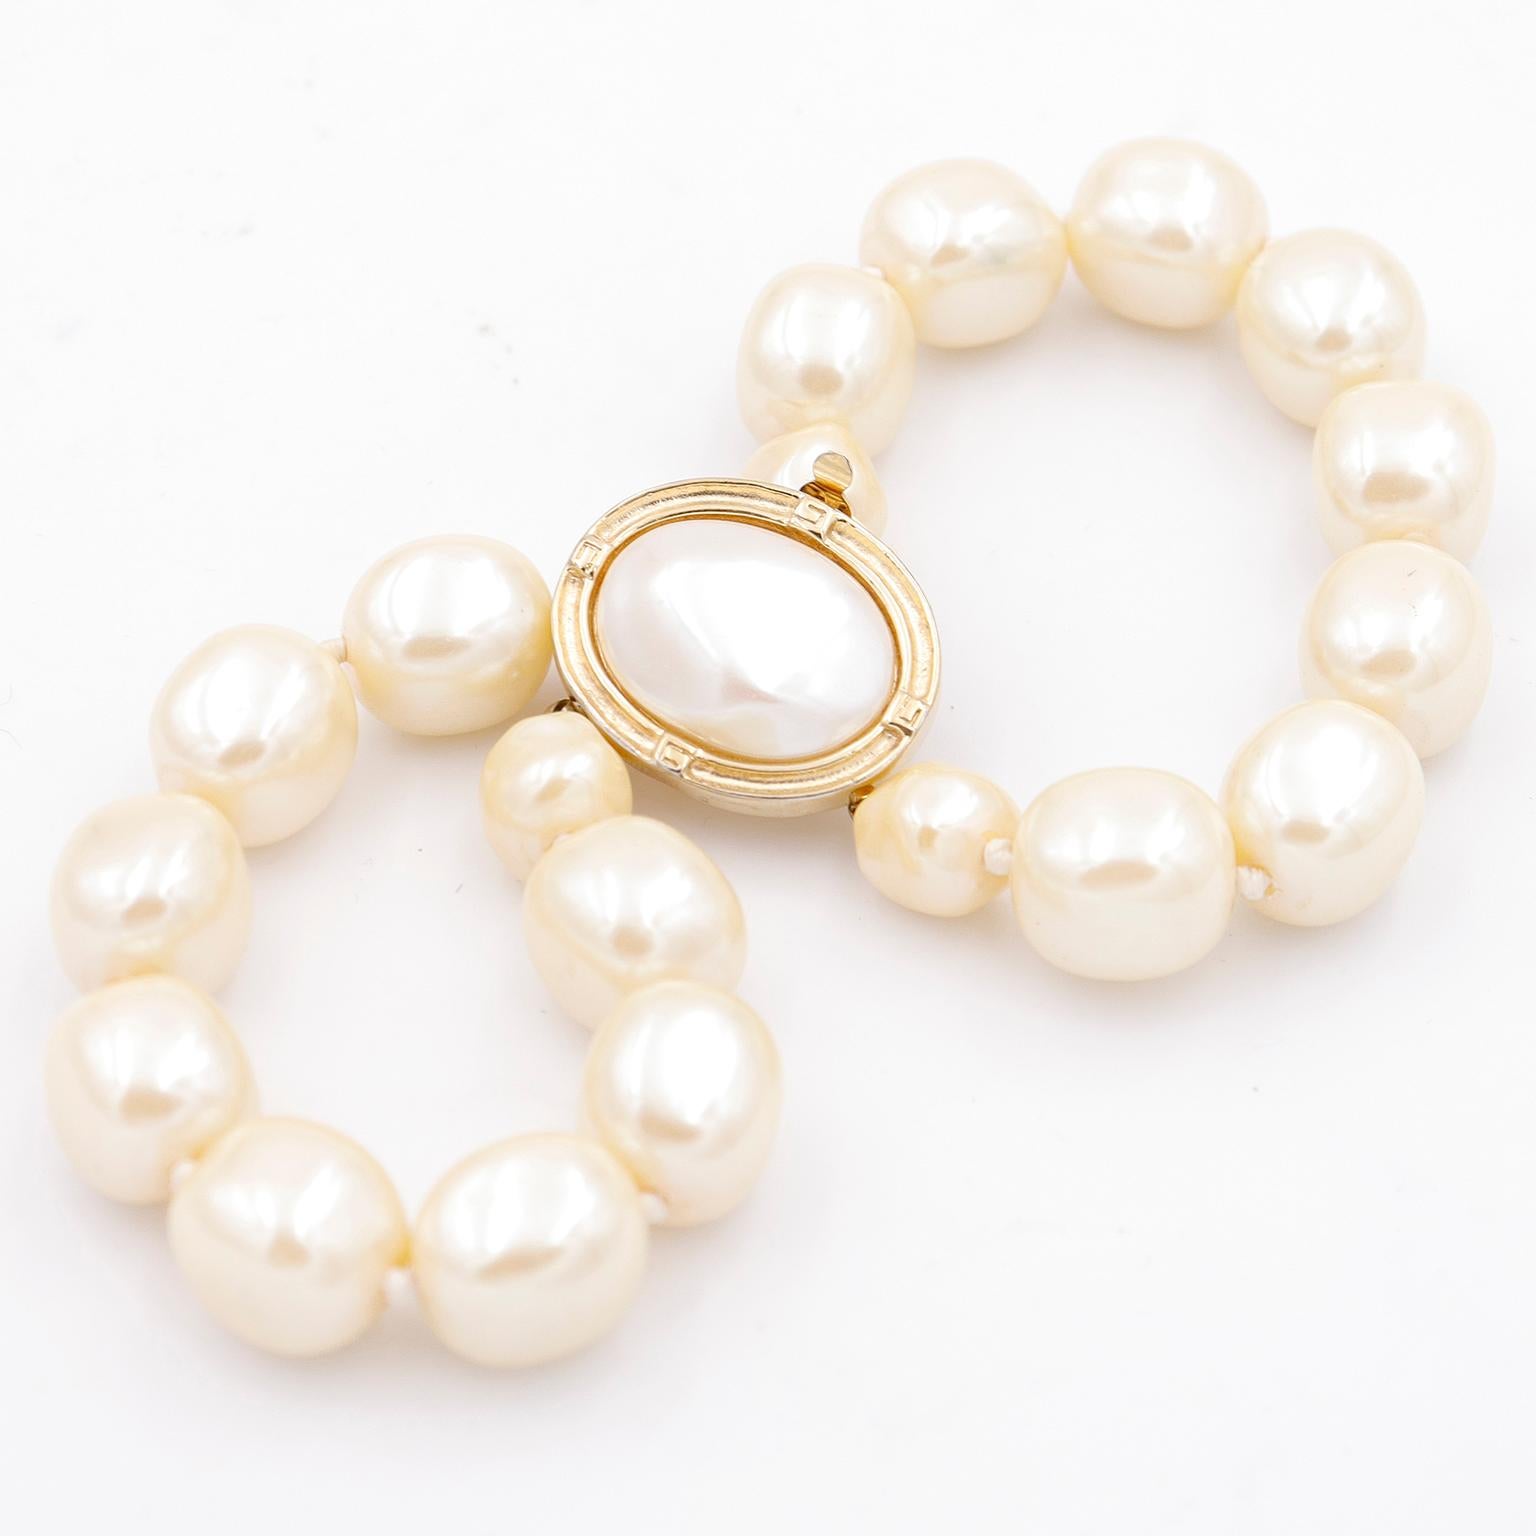 Givenchy Vintage Double Strand Faux Baroque Pearl Bracelet w Gold Plate Clasp In Excellent Condition For Sale In Portland, OR